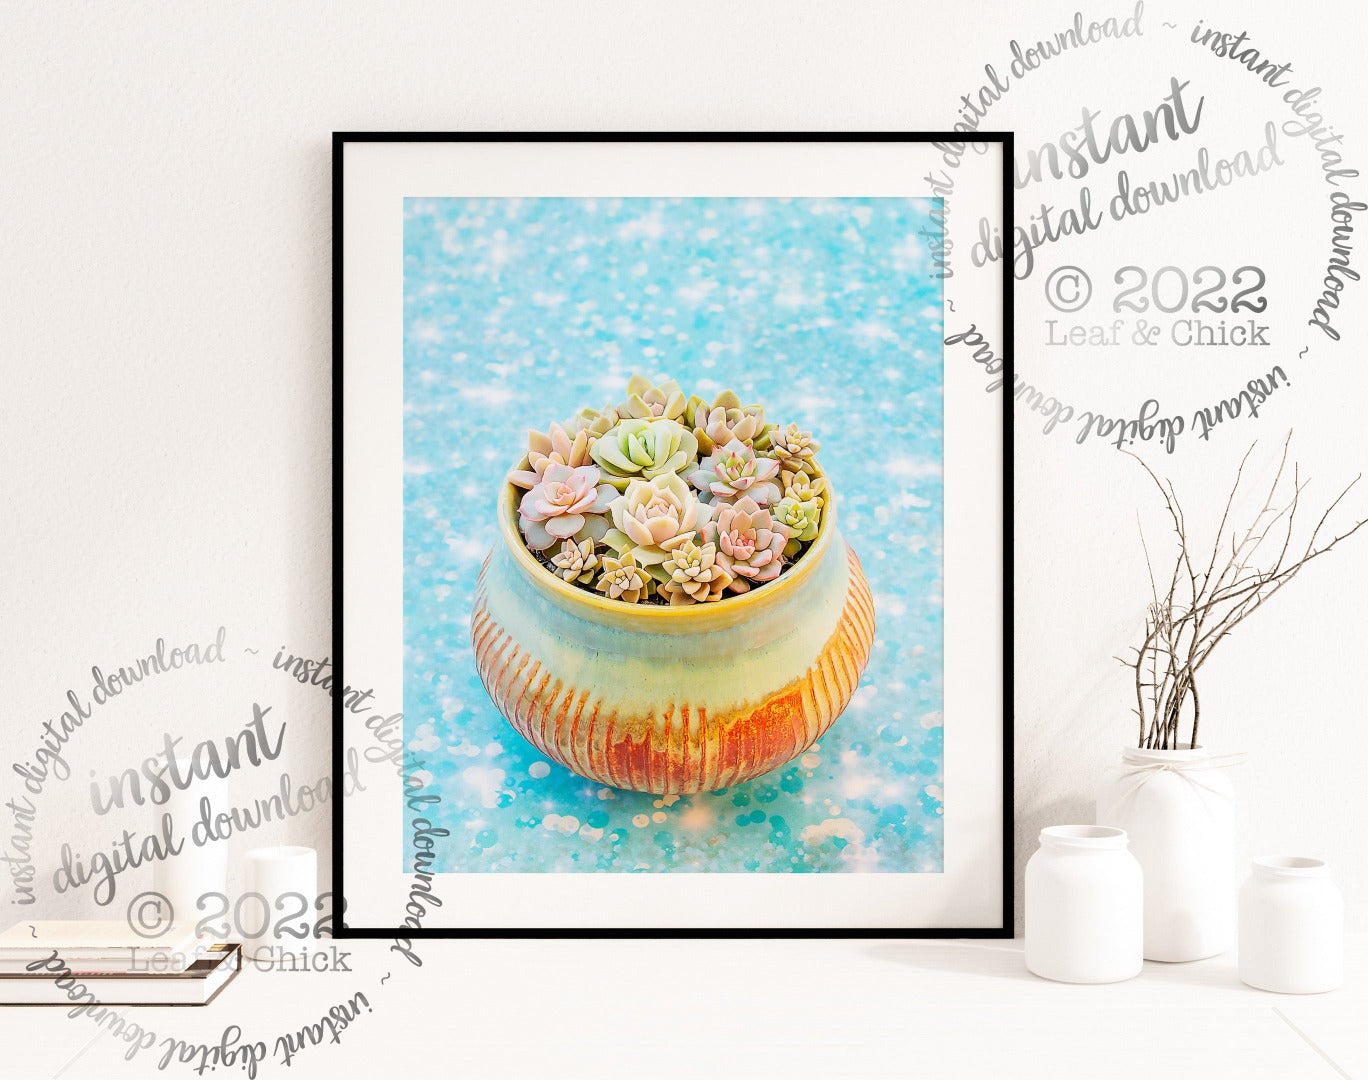 bright blue background with succulent art bowl